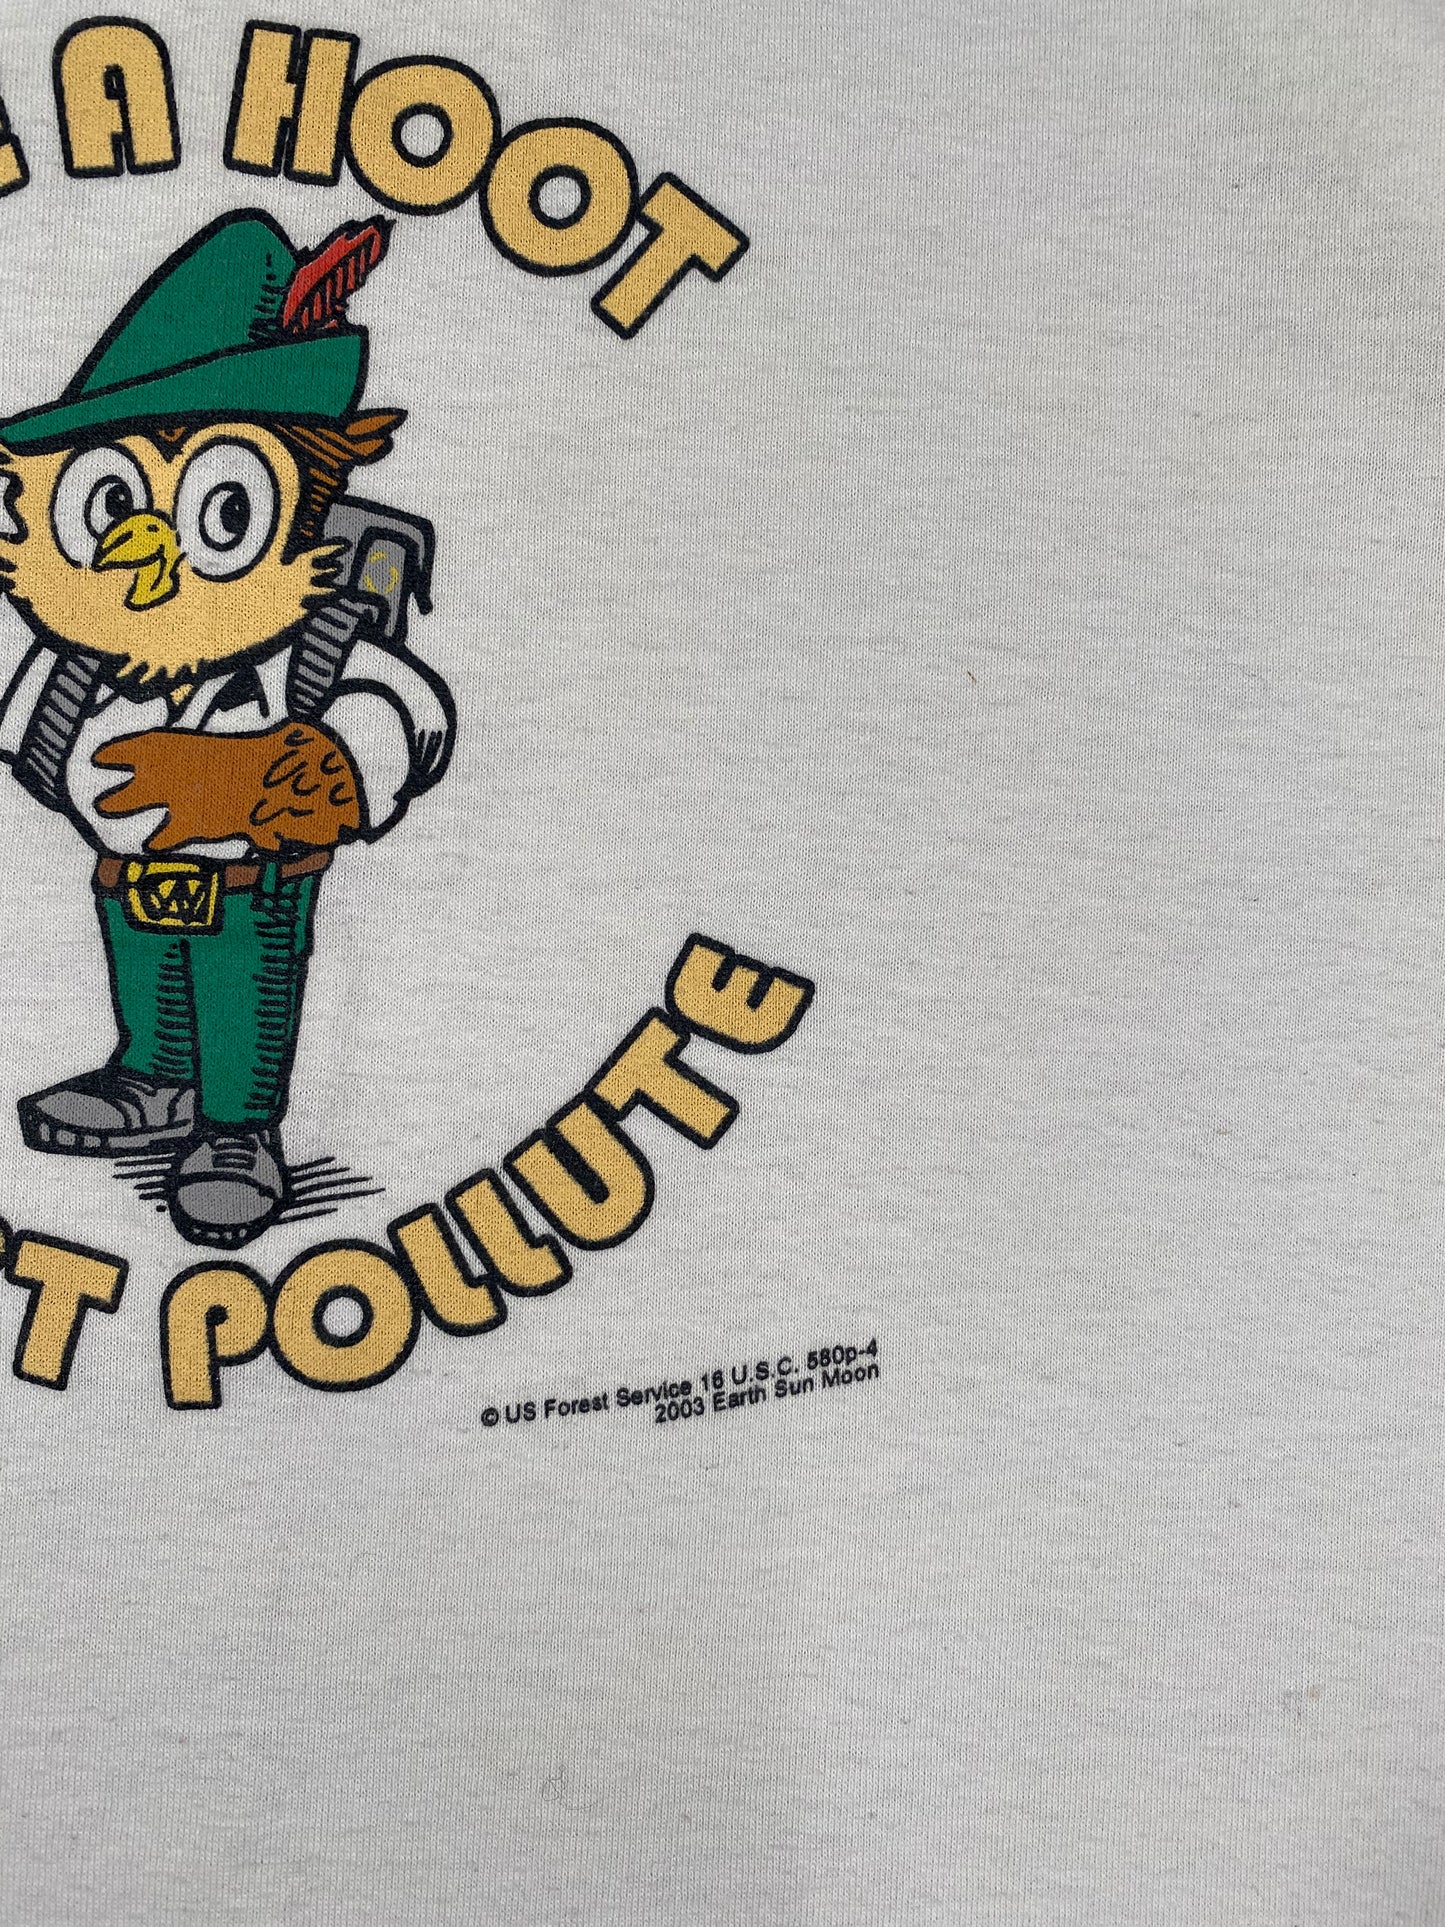 Give a Hoot Don't Pollute Tee (XL)